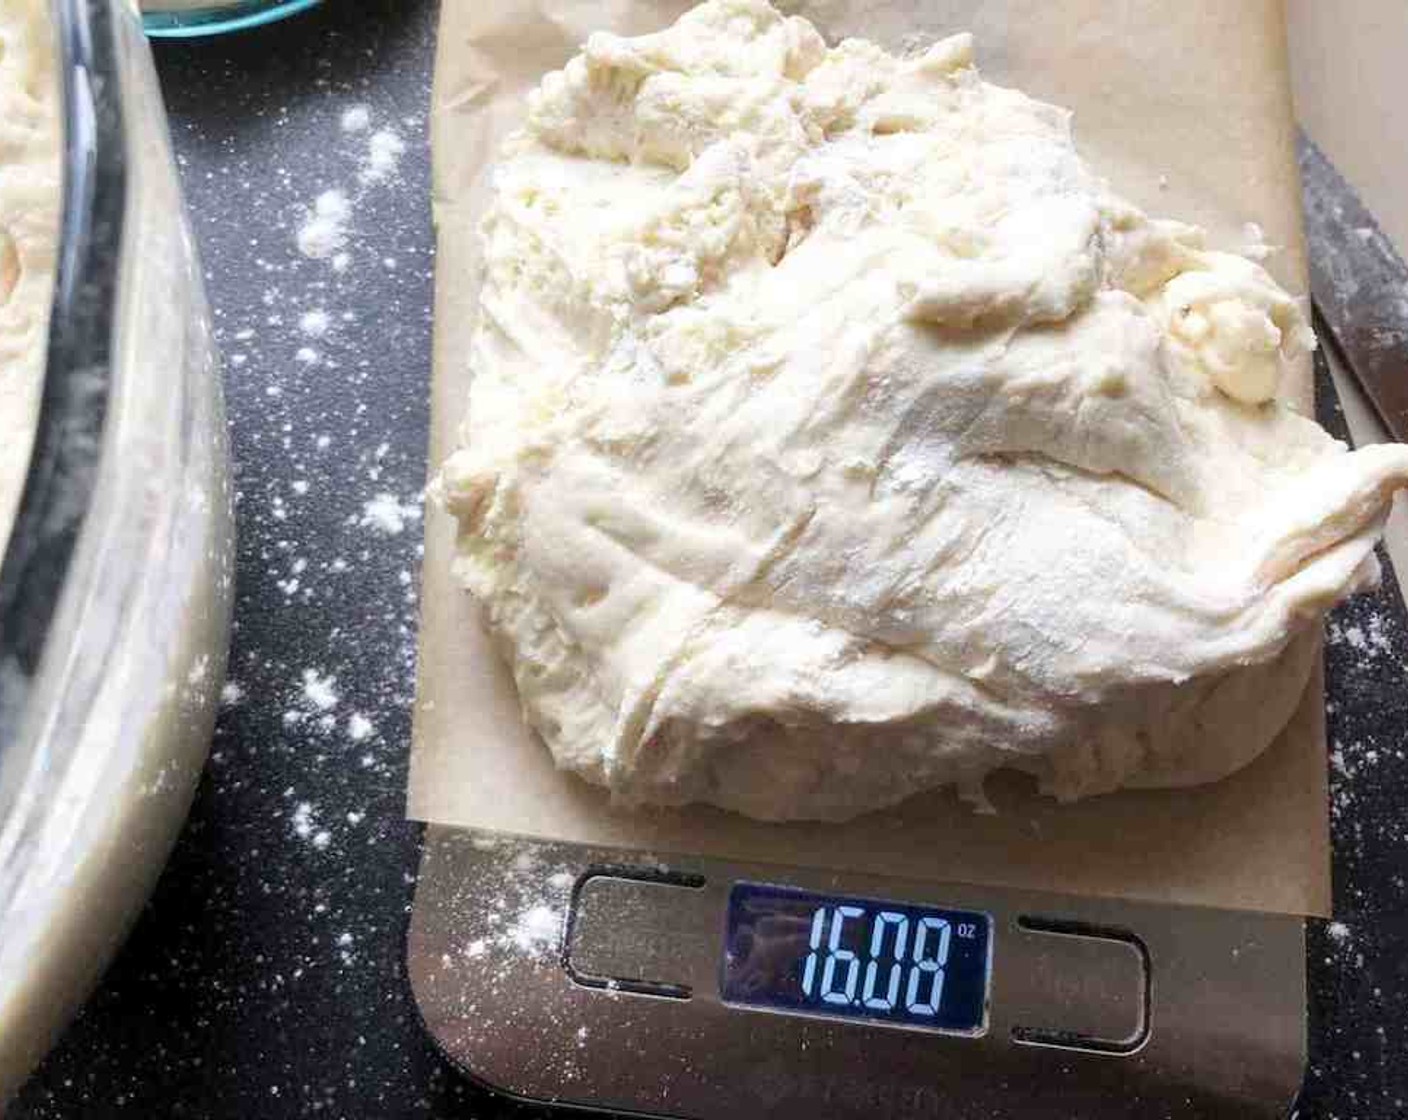 step 7 Grab that refrigerated container of prepared dough and sprinkle the surface of the dough with flour. Pull up and cut off a piece of dough weighing about 16 oz.